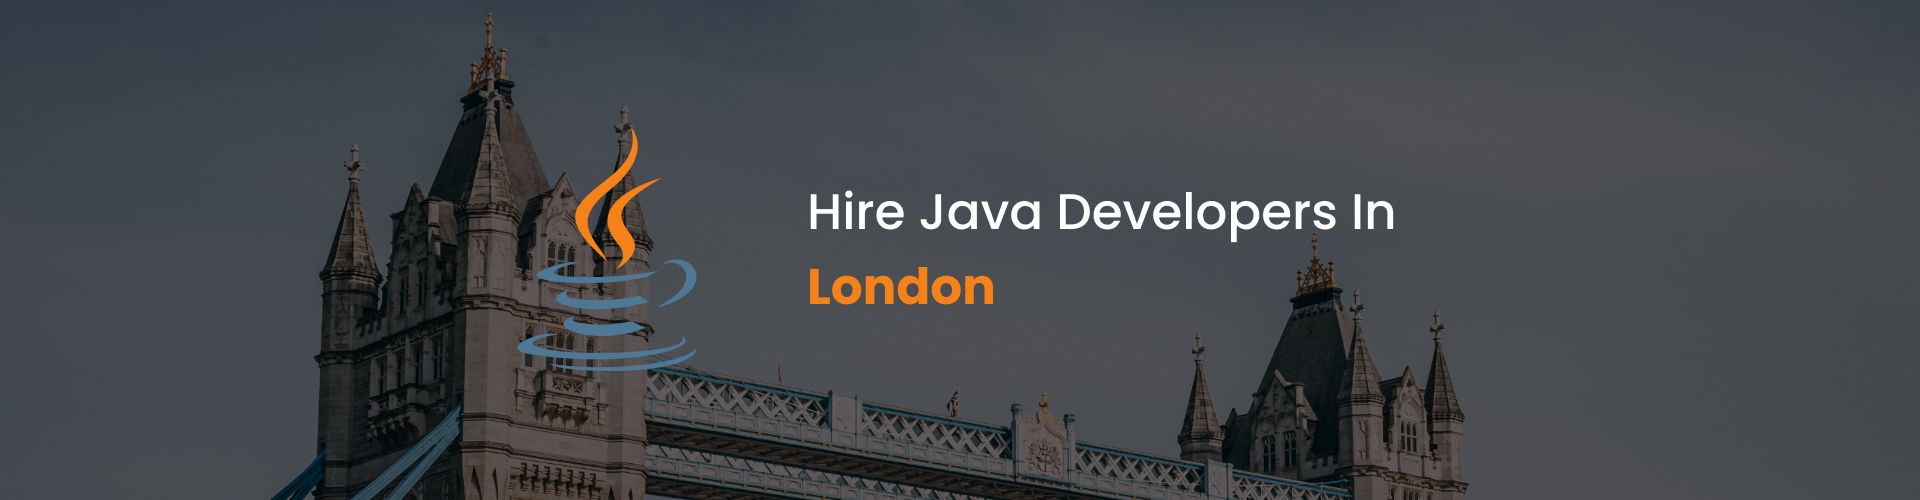 hire java developers in london